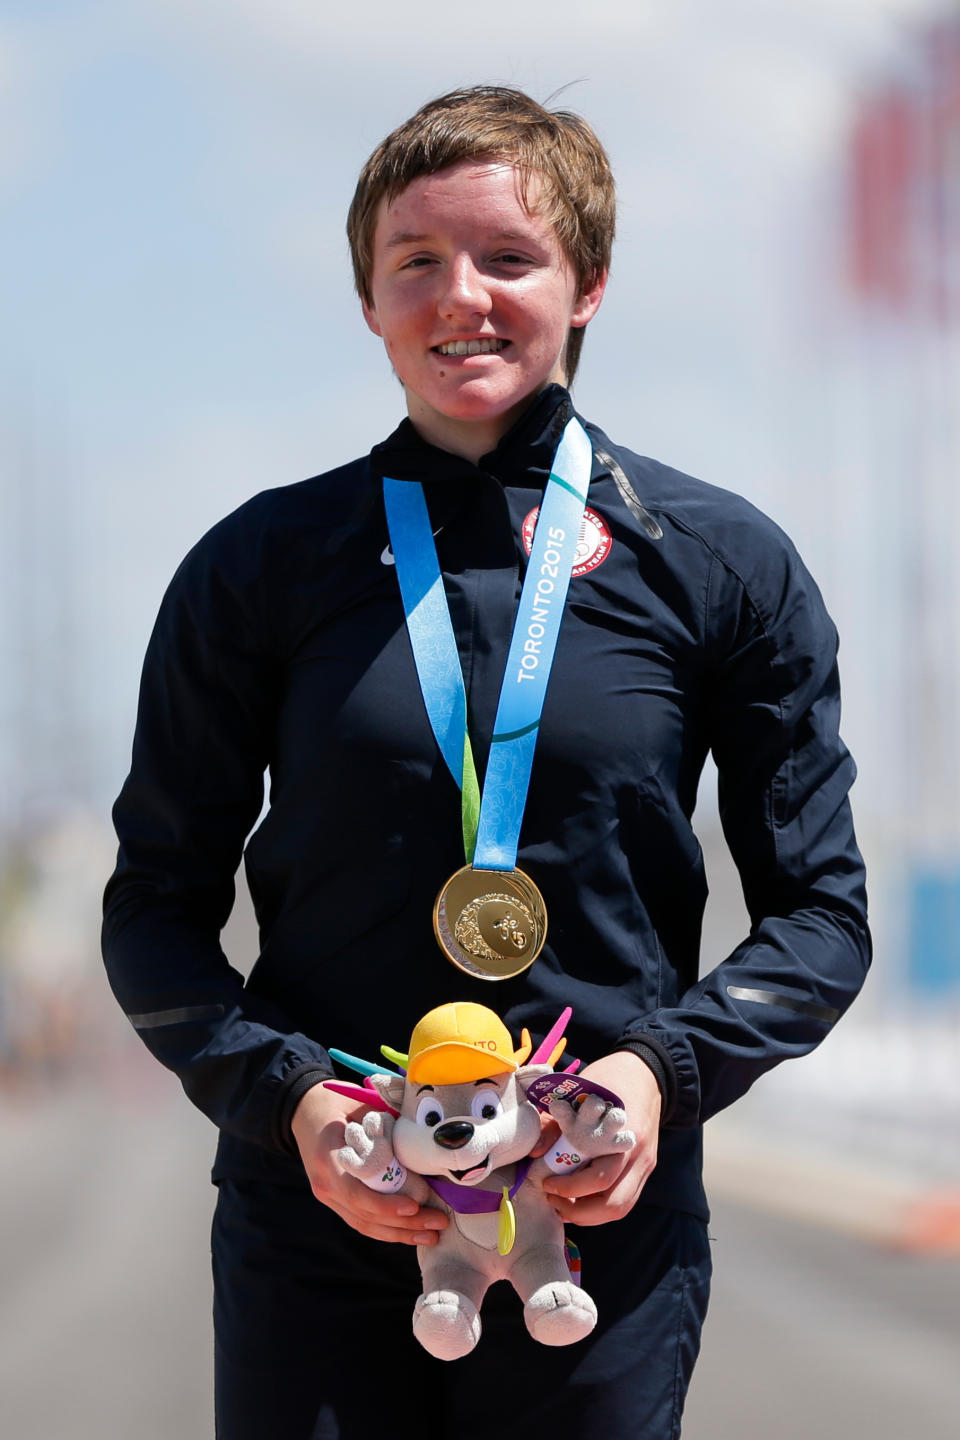 Olympic Cyclist Kelly Catlin Dead of Apparent Suicide